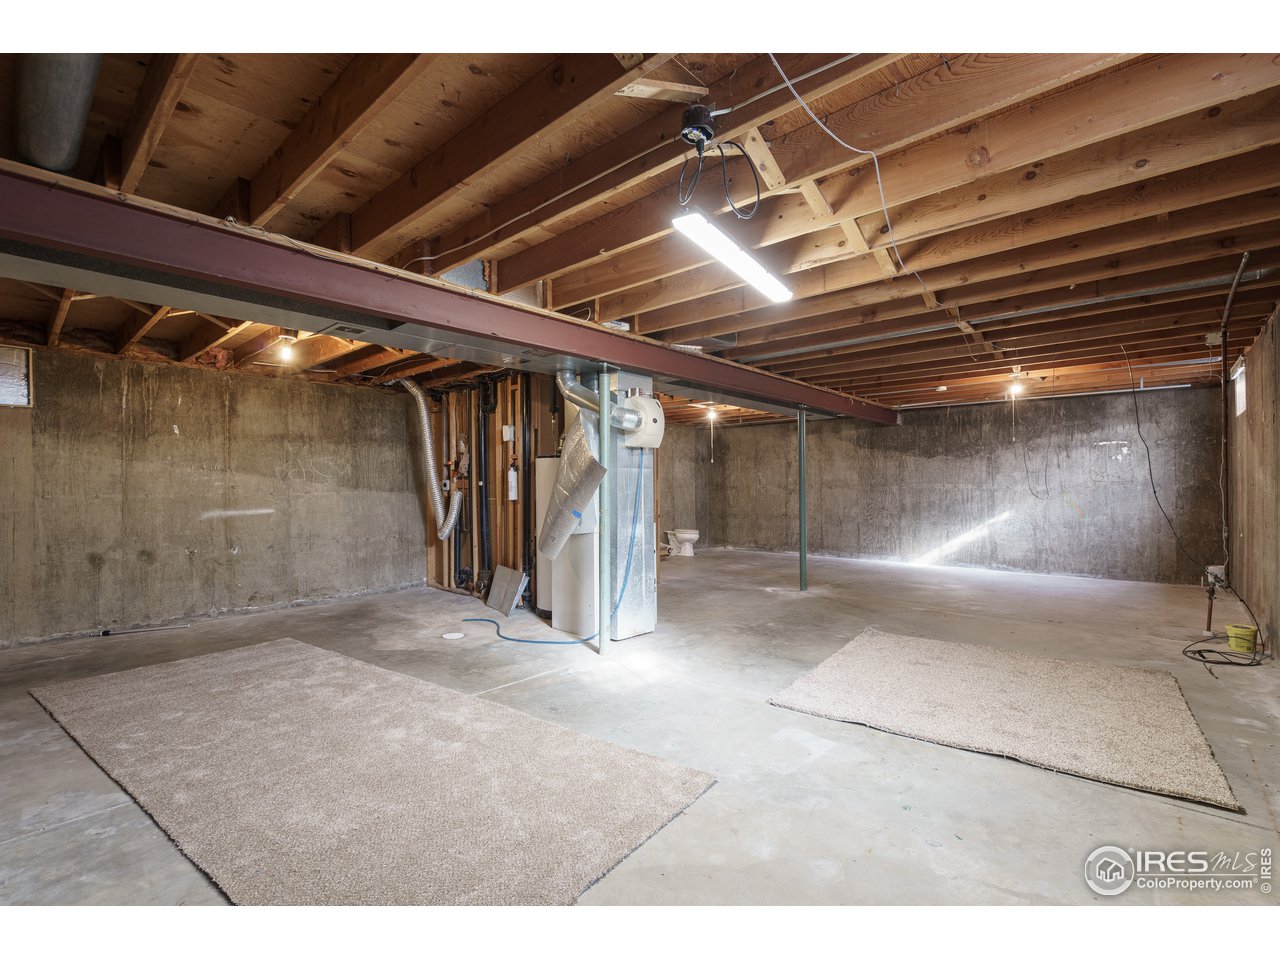 Unfinished Basement Ready for Your Finishing Touch